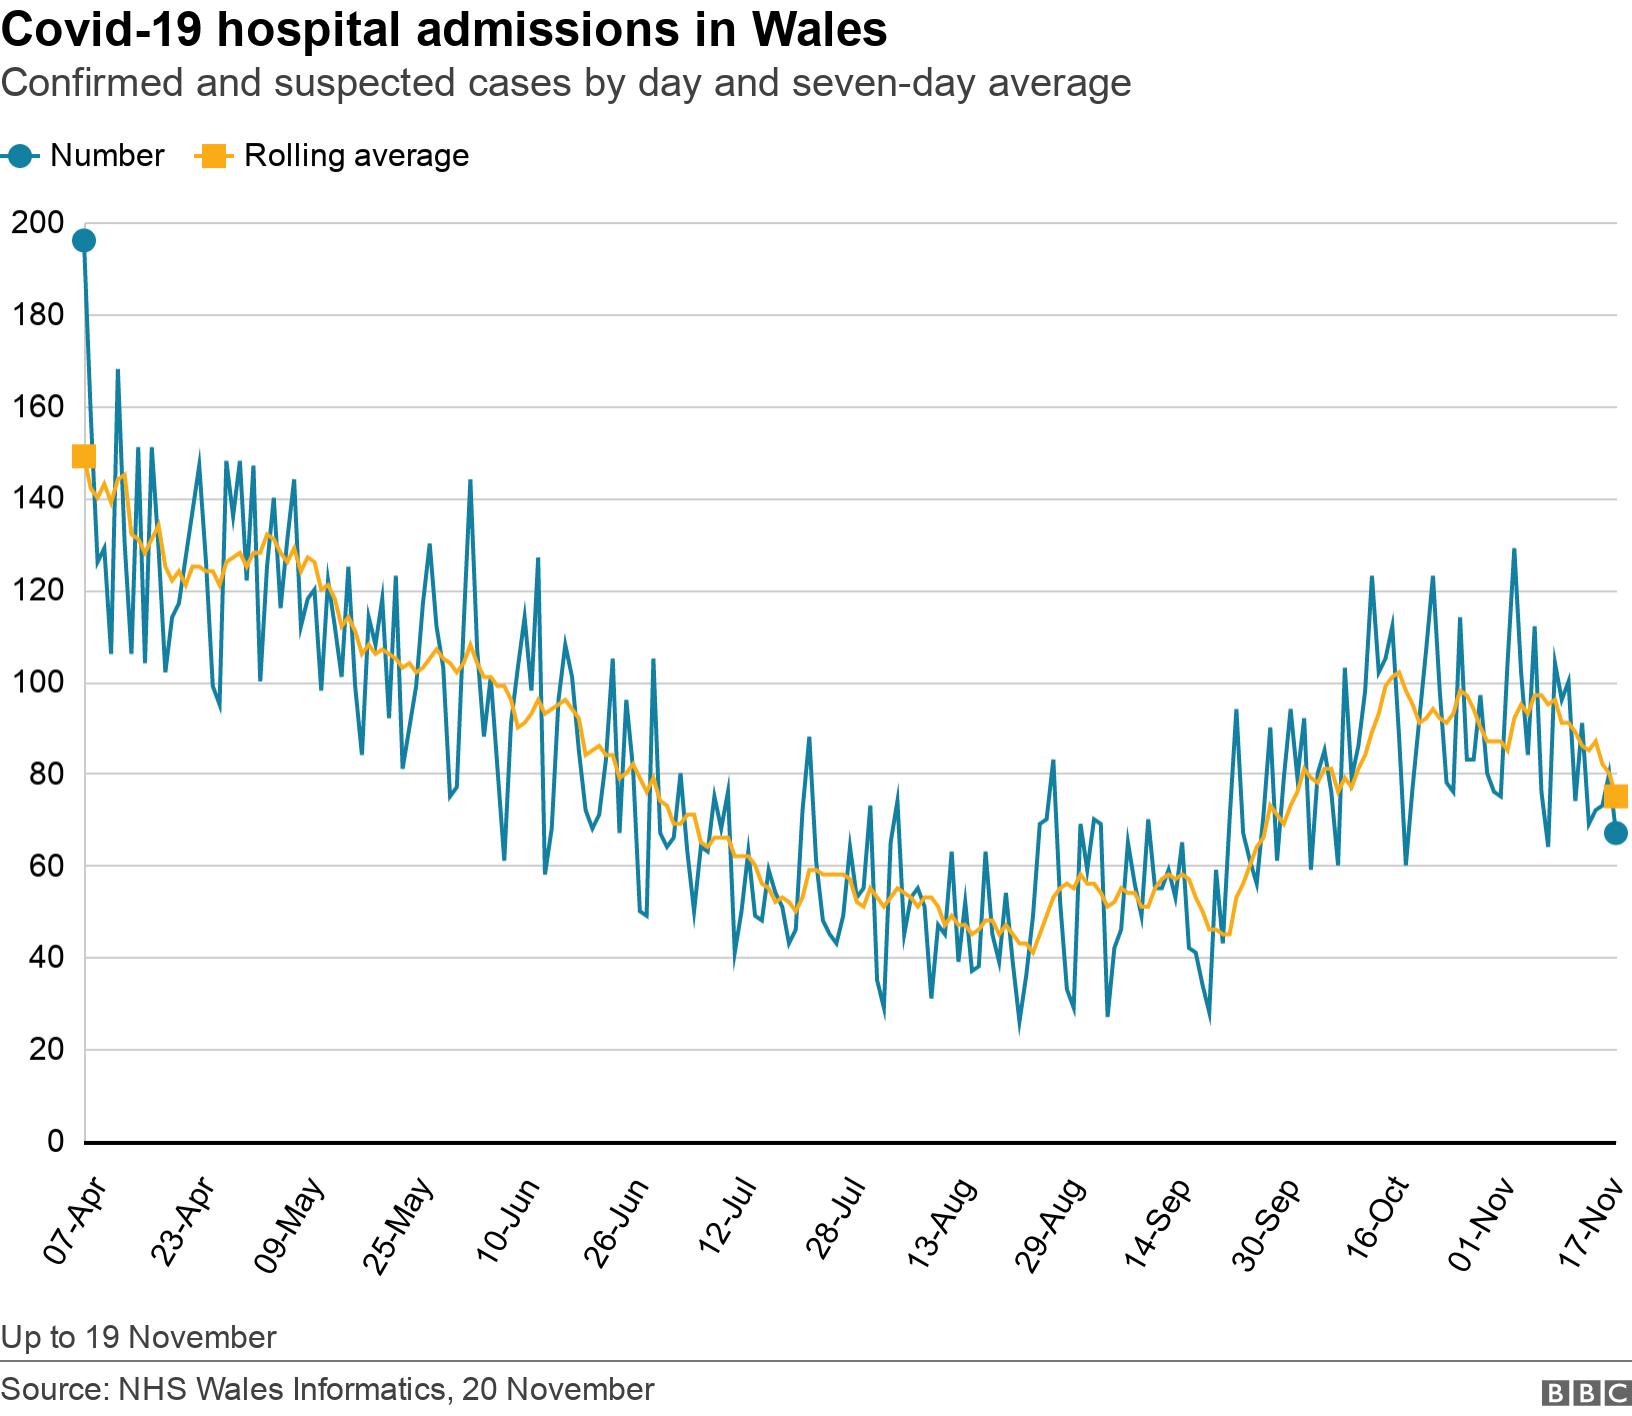 Covid-19 hospital admissions in Wales. Confirmed and suspected cases by day and seven-day average.  Up to 19 November.